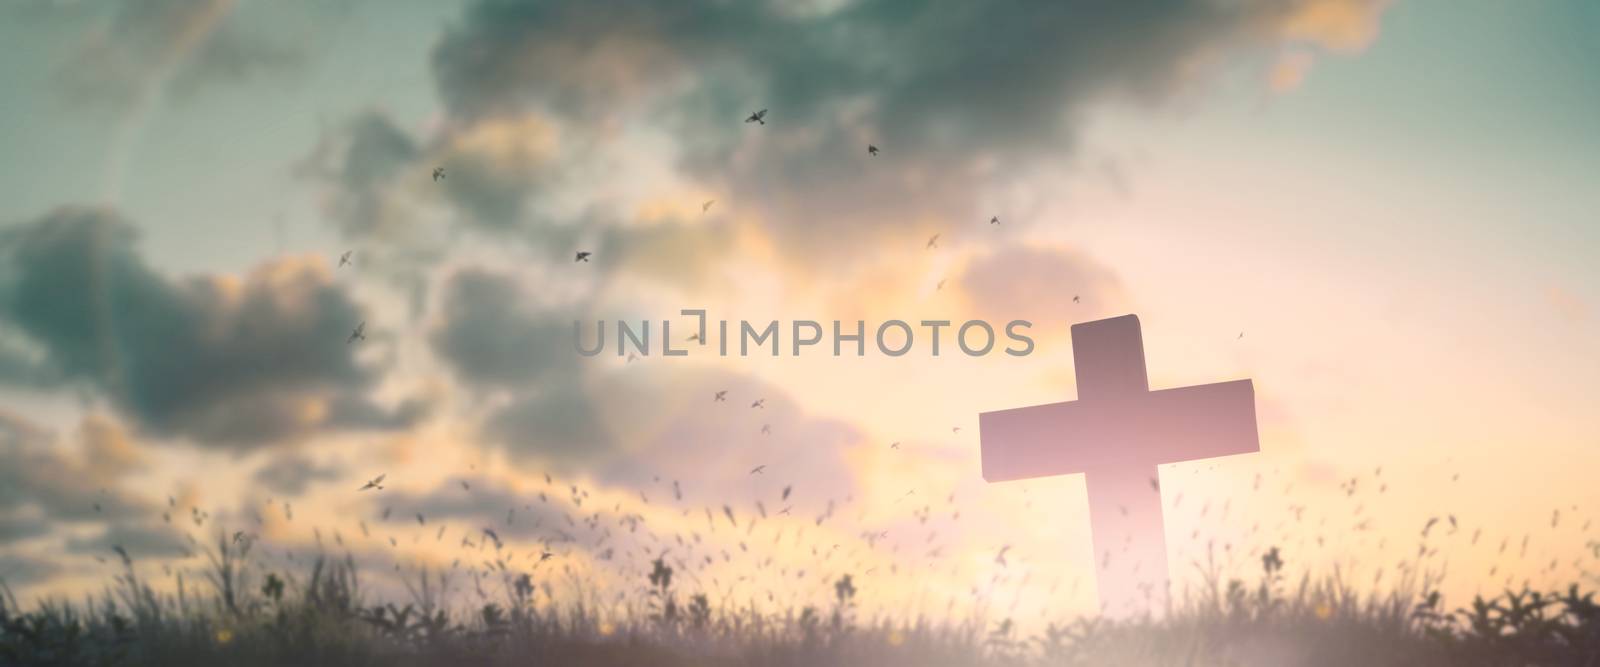 Silhouette jesus christ crucifix on cross on calvary sunset background concept for good friday he is risen in easter day, good friday jesus death on crucifix, world christian and holy spirit religious.